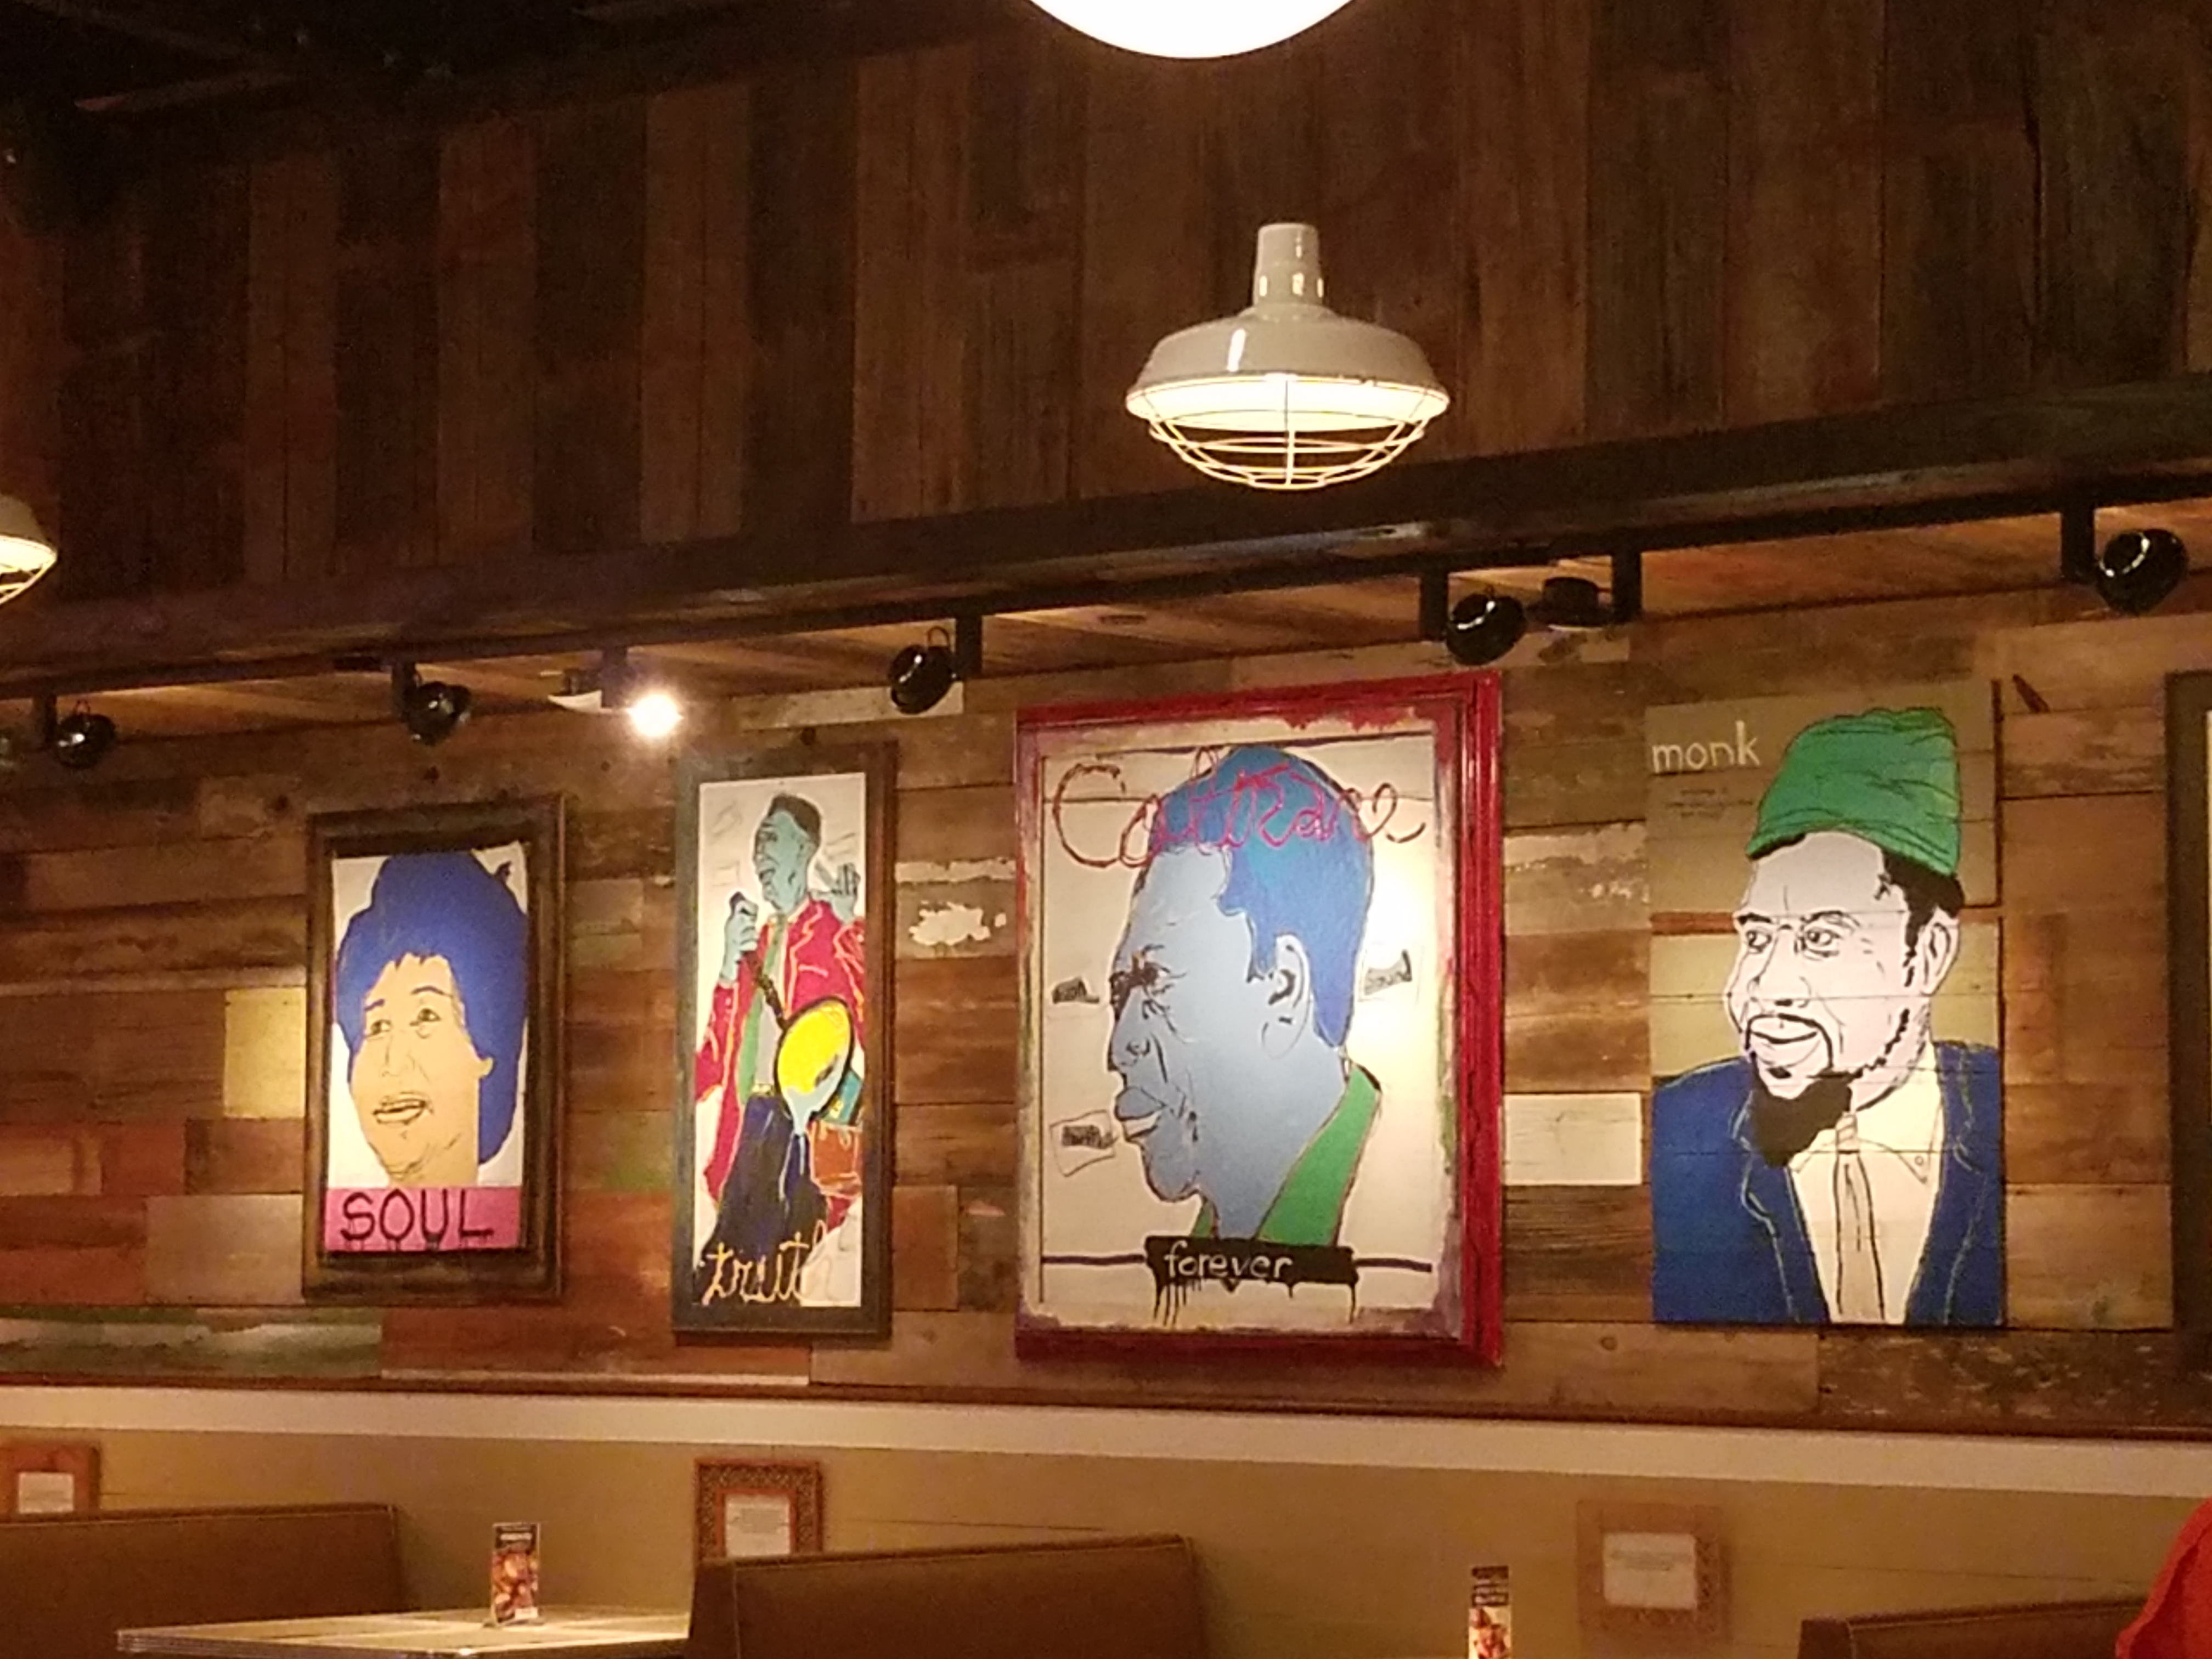 Colorful artwork featuring famous jazz musicians line the wall of the dining area. Photo by The Signal reporter Bianca Salazar.